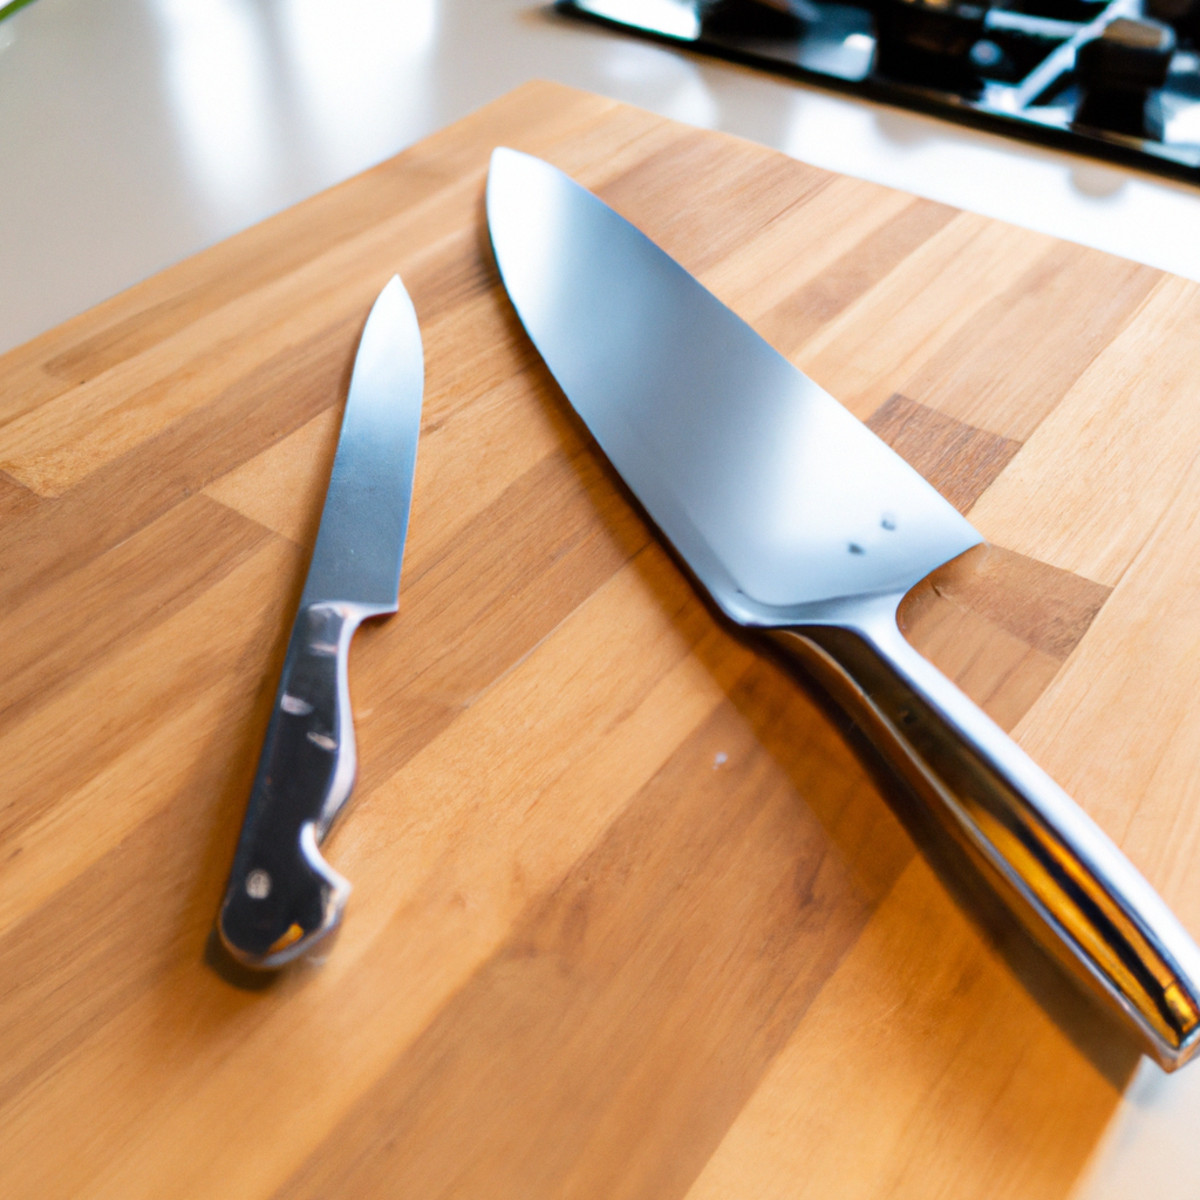 Japanese Stainless Steel vs High Carbon Steel- Both Used to Make Kitchen Knives